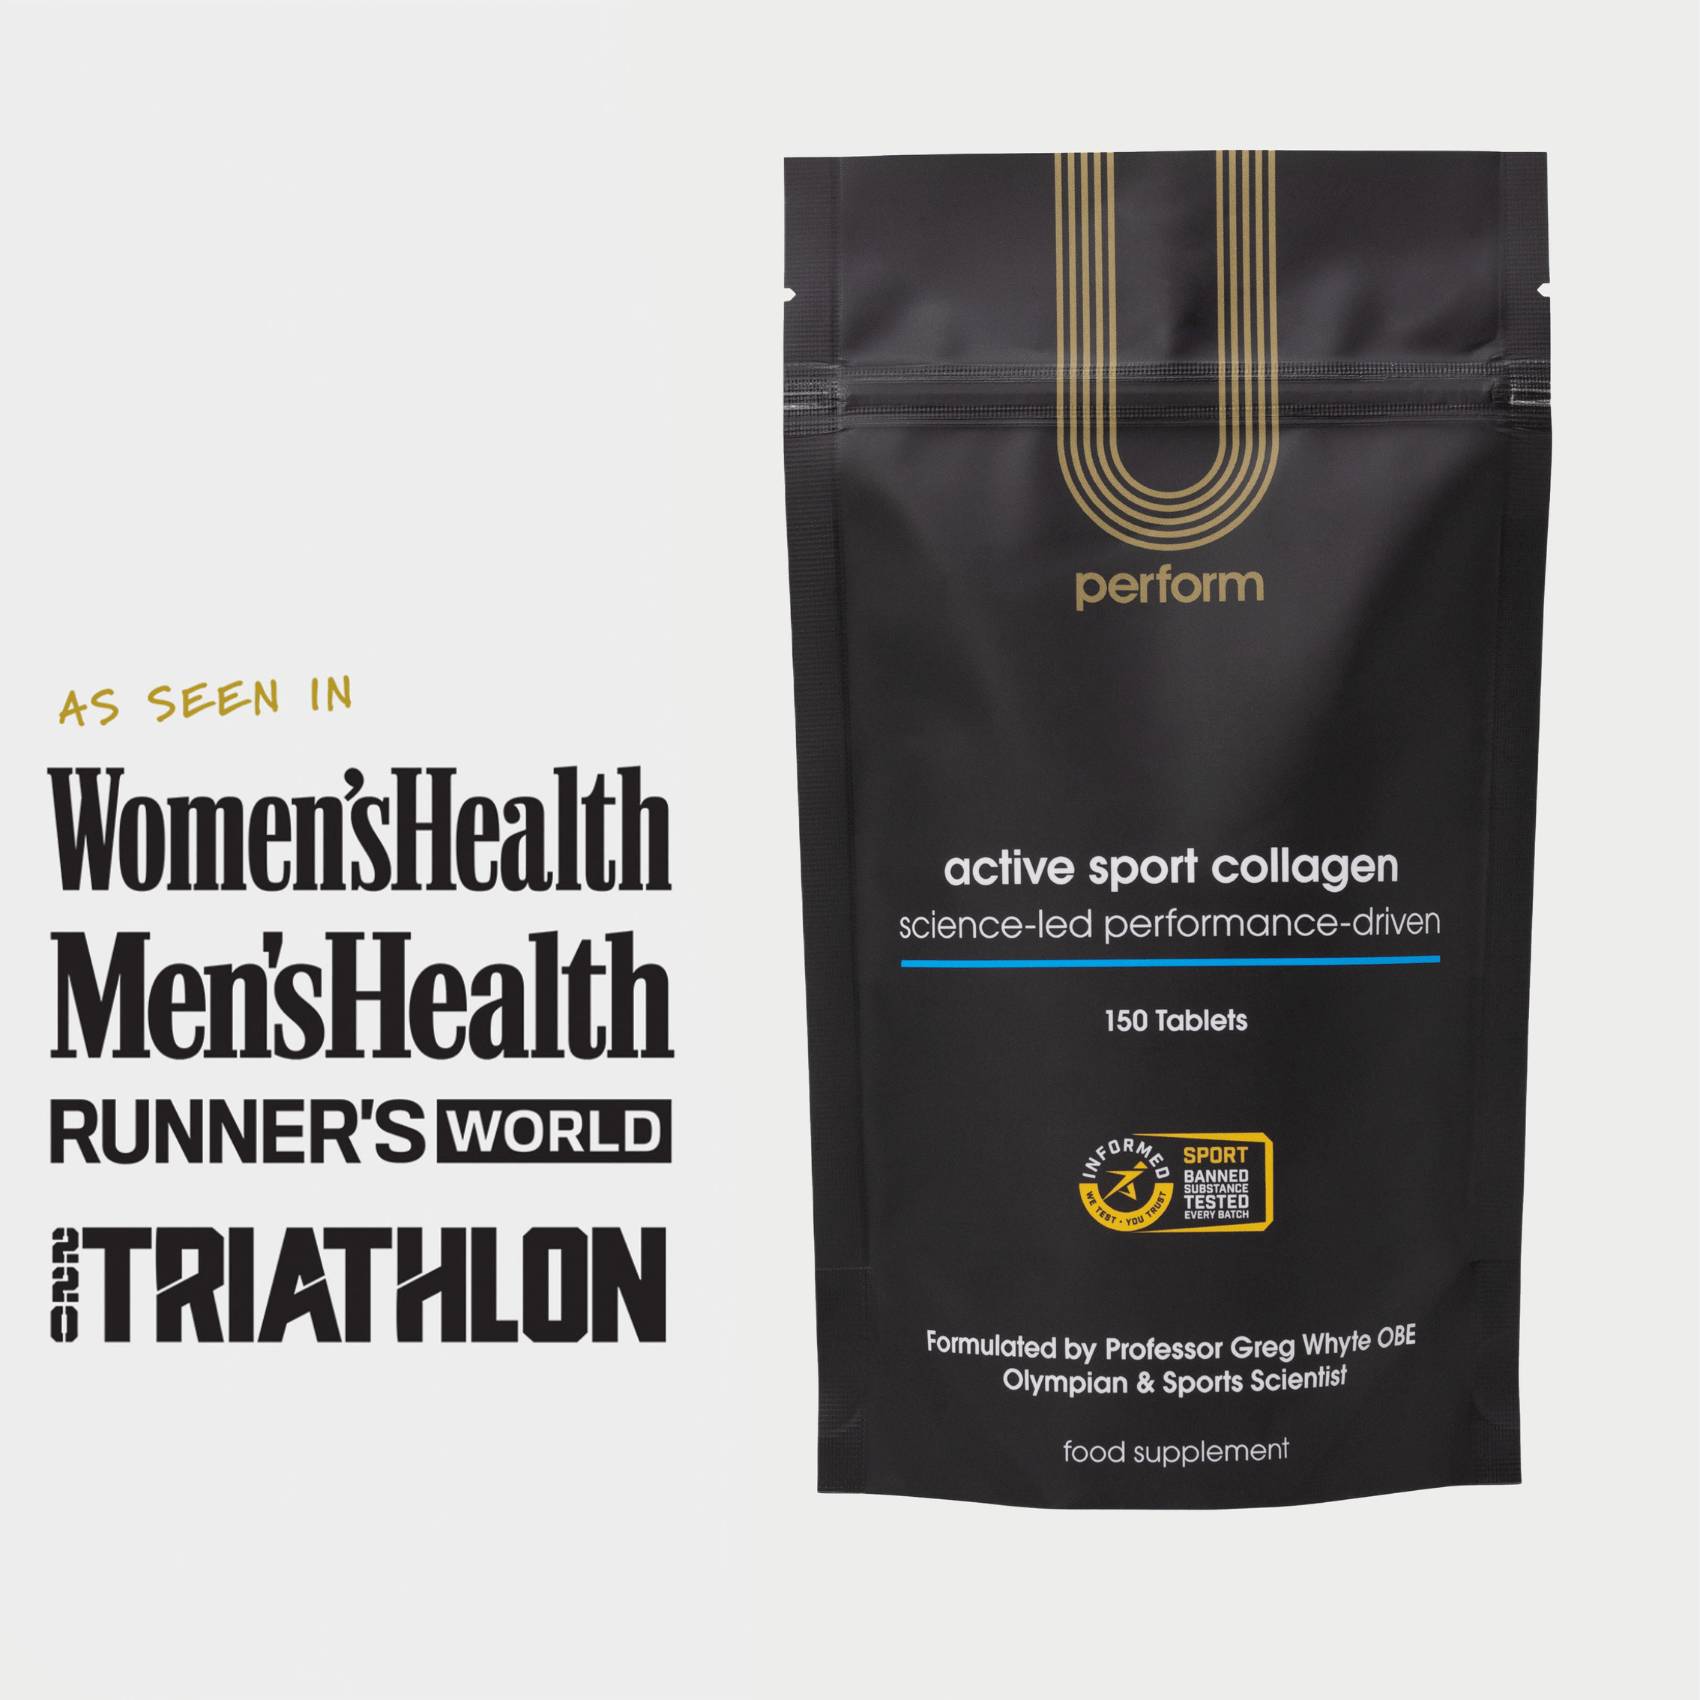 U Perform Active Sport Collagen Supplement Tablets product packaging black pouch standing As Seen In Women's Health Men's Health Runner's World 220 Triathlon graphics showing next to product